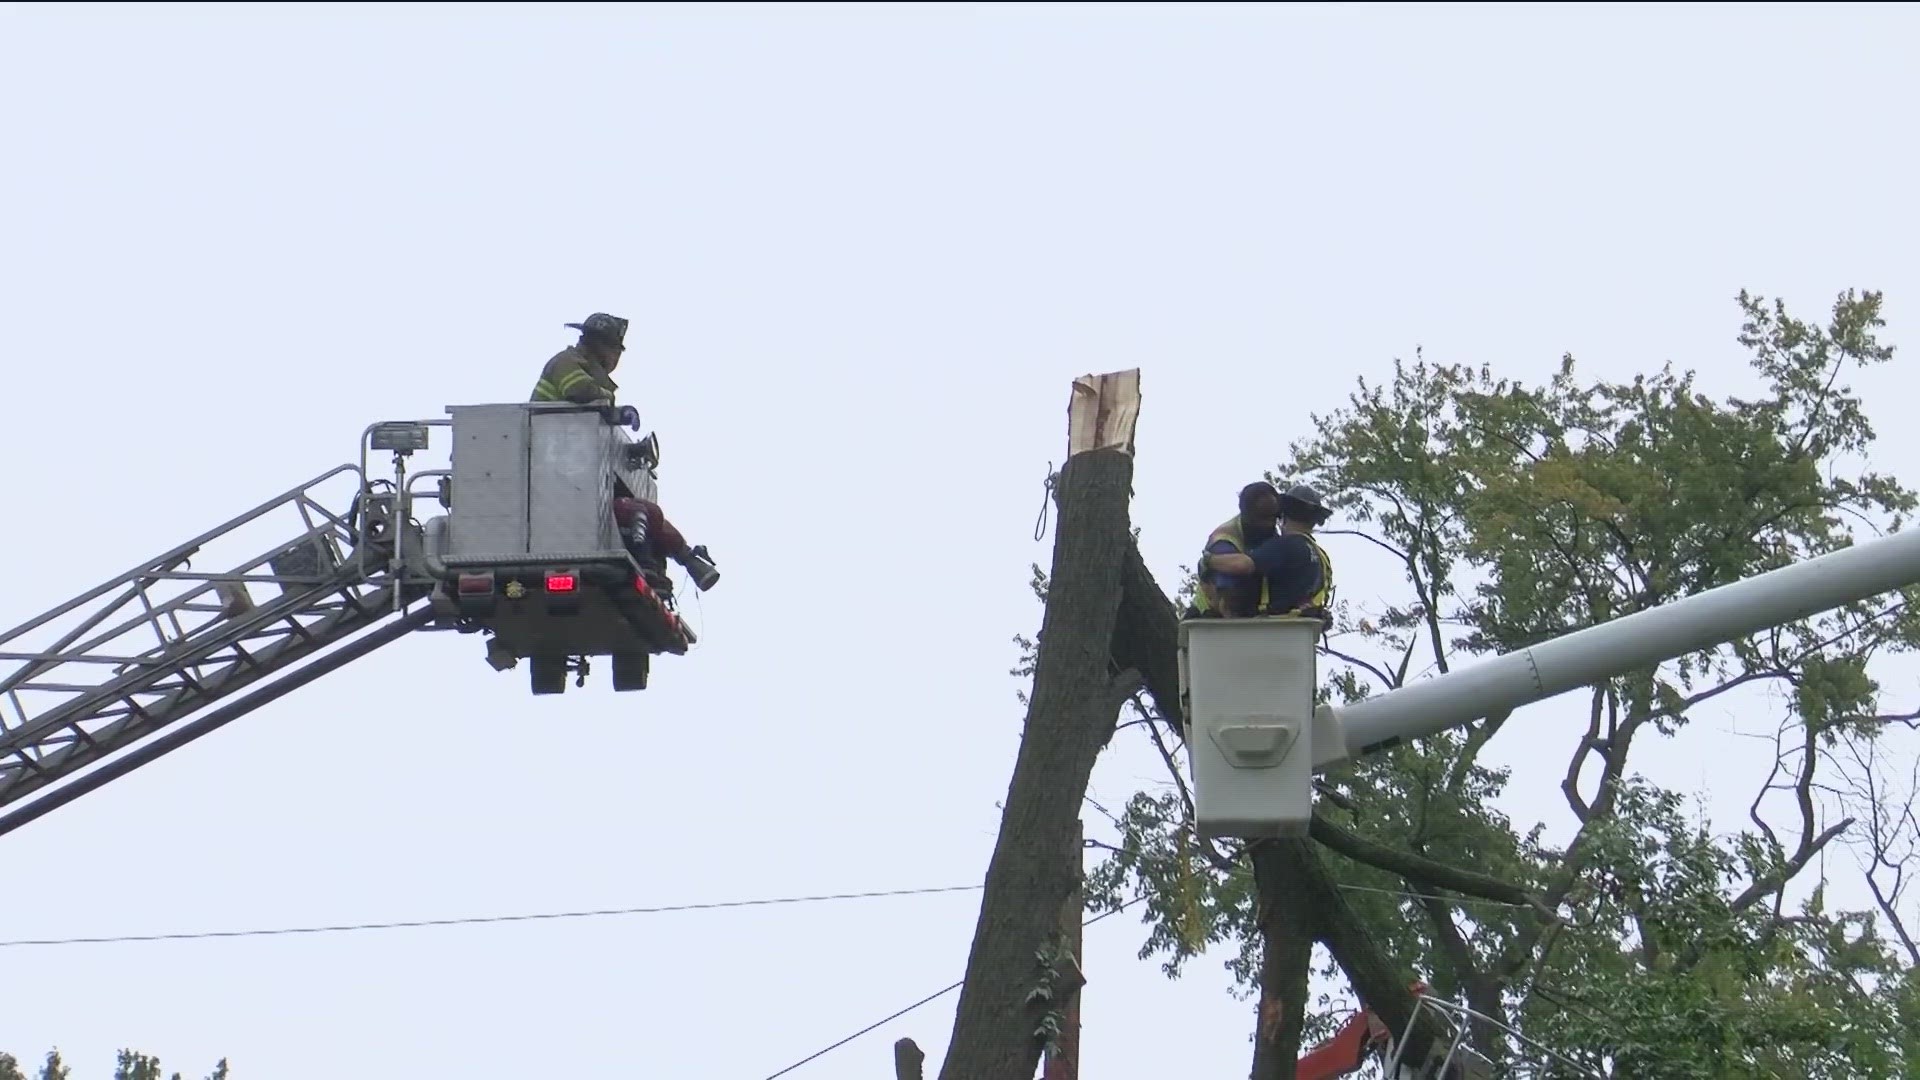 The worker was taken to the hospital after the boom lift got caught in the tree, trapping the worker.